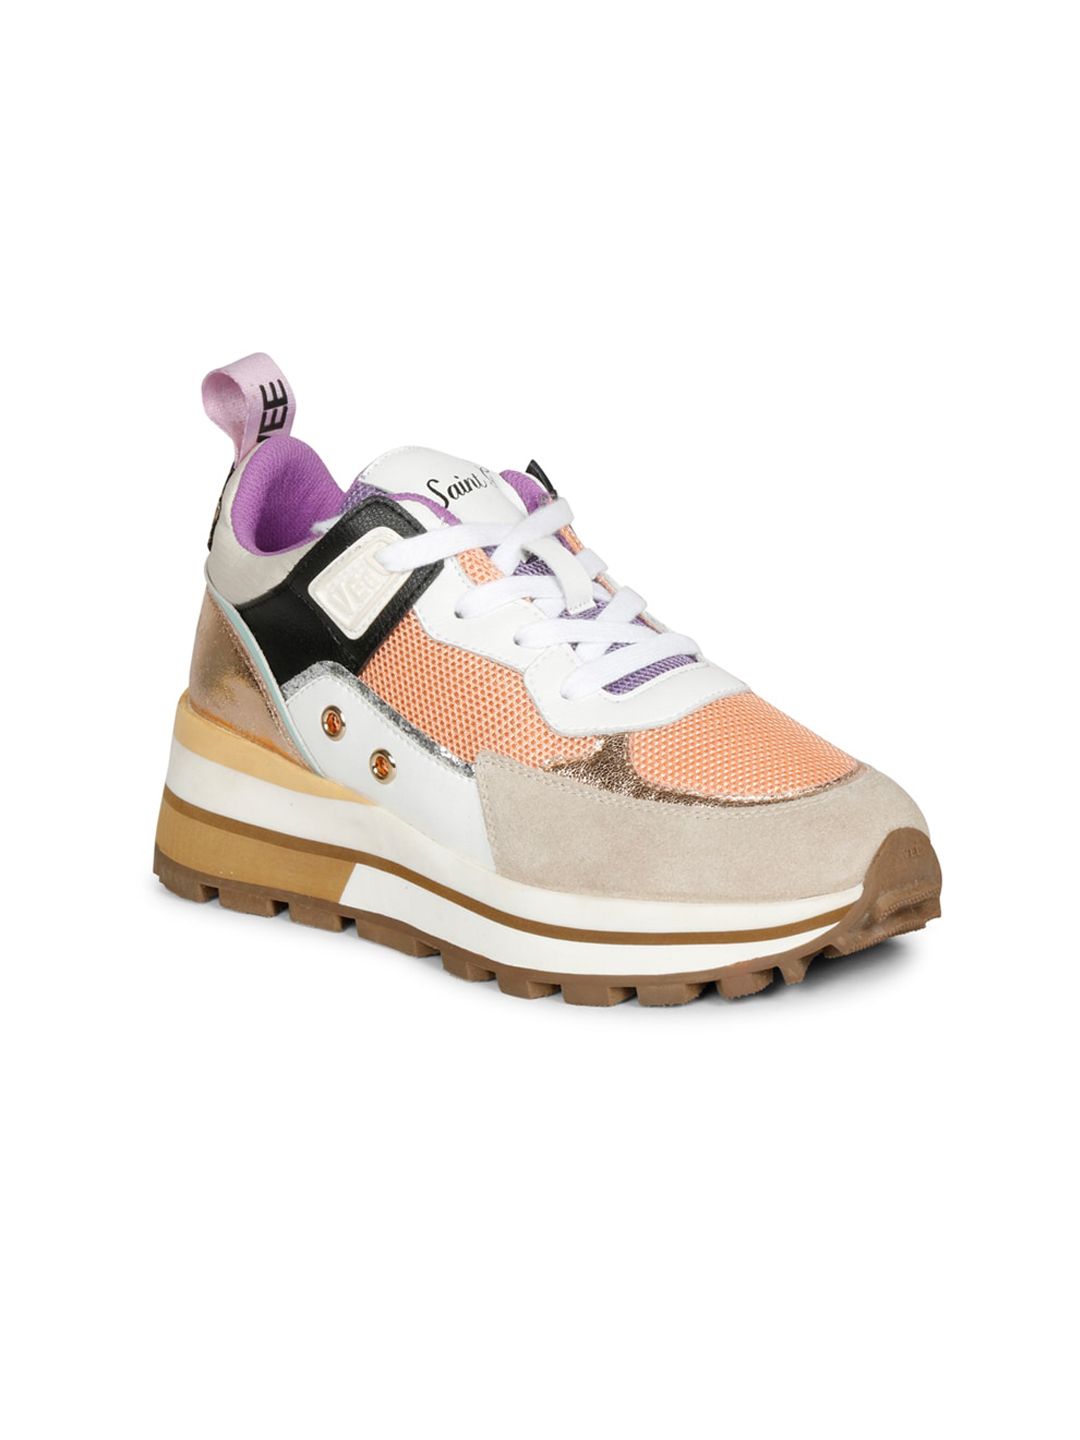 Saint G Women Peach Colourblocked Leather Sneakers Price in India